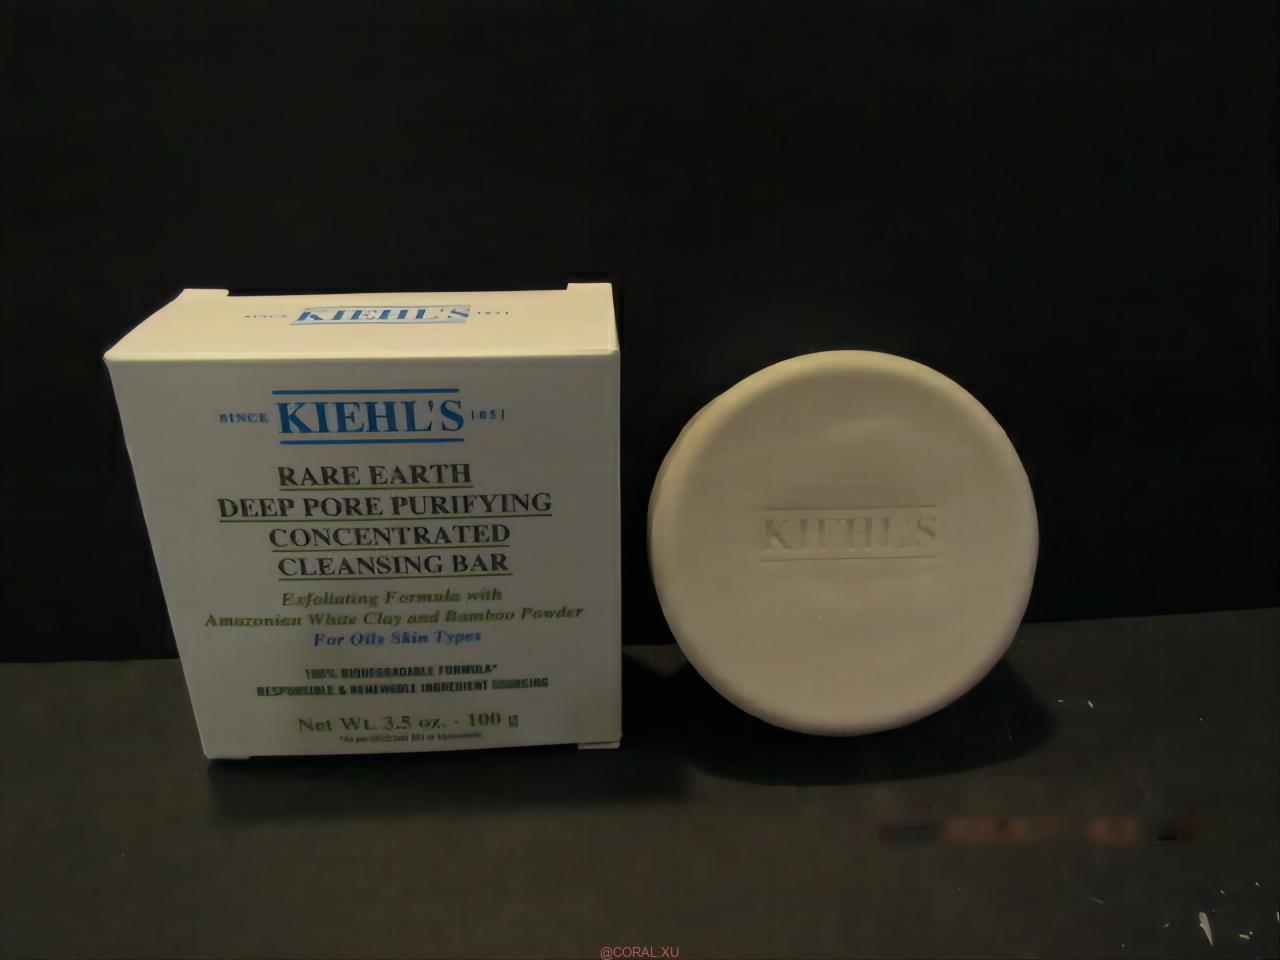 00002296 1 - Kiehl’s Rare Earth Deep Pore Purifying Concentrated Facial Cleansing Bar Review